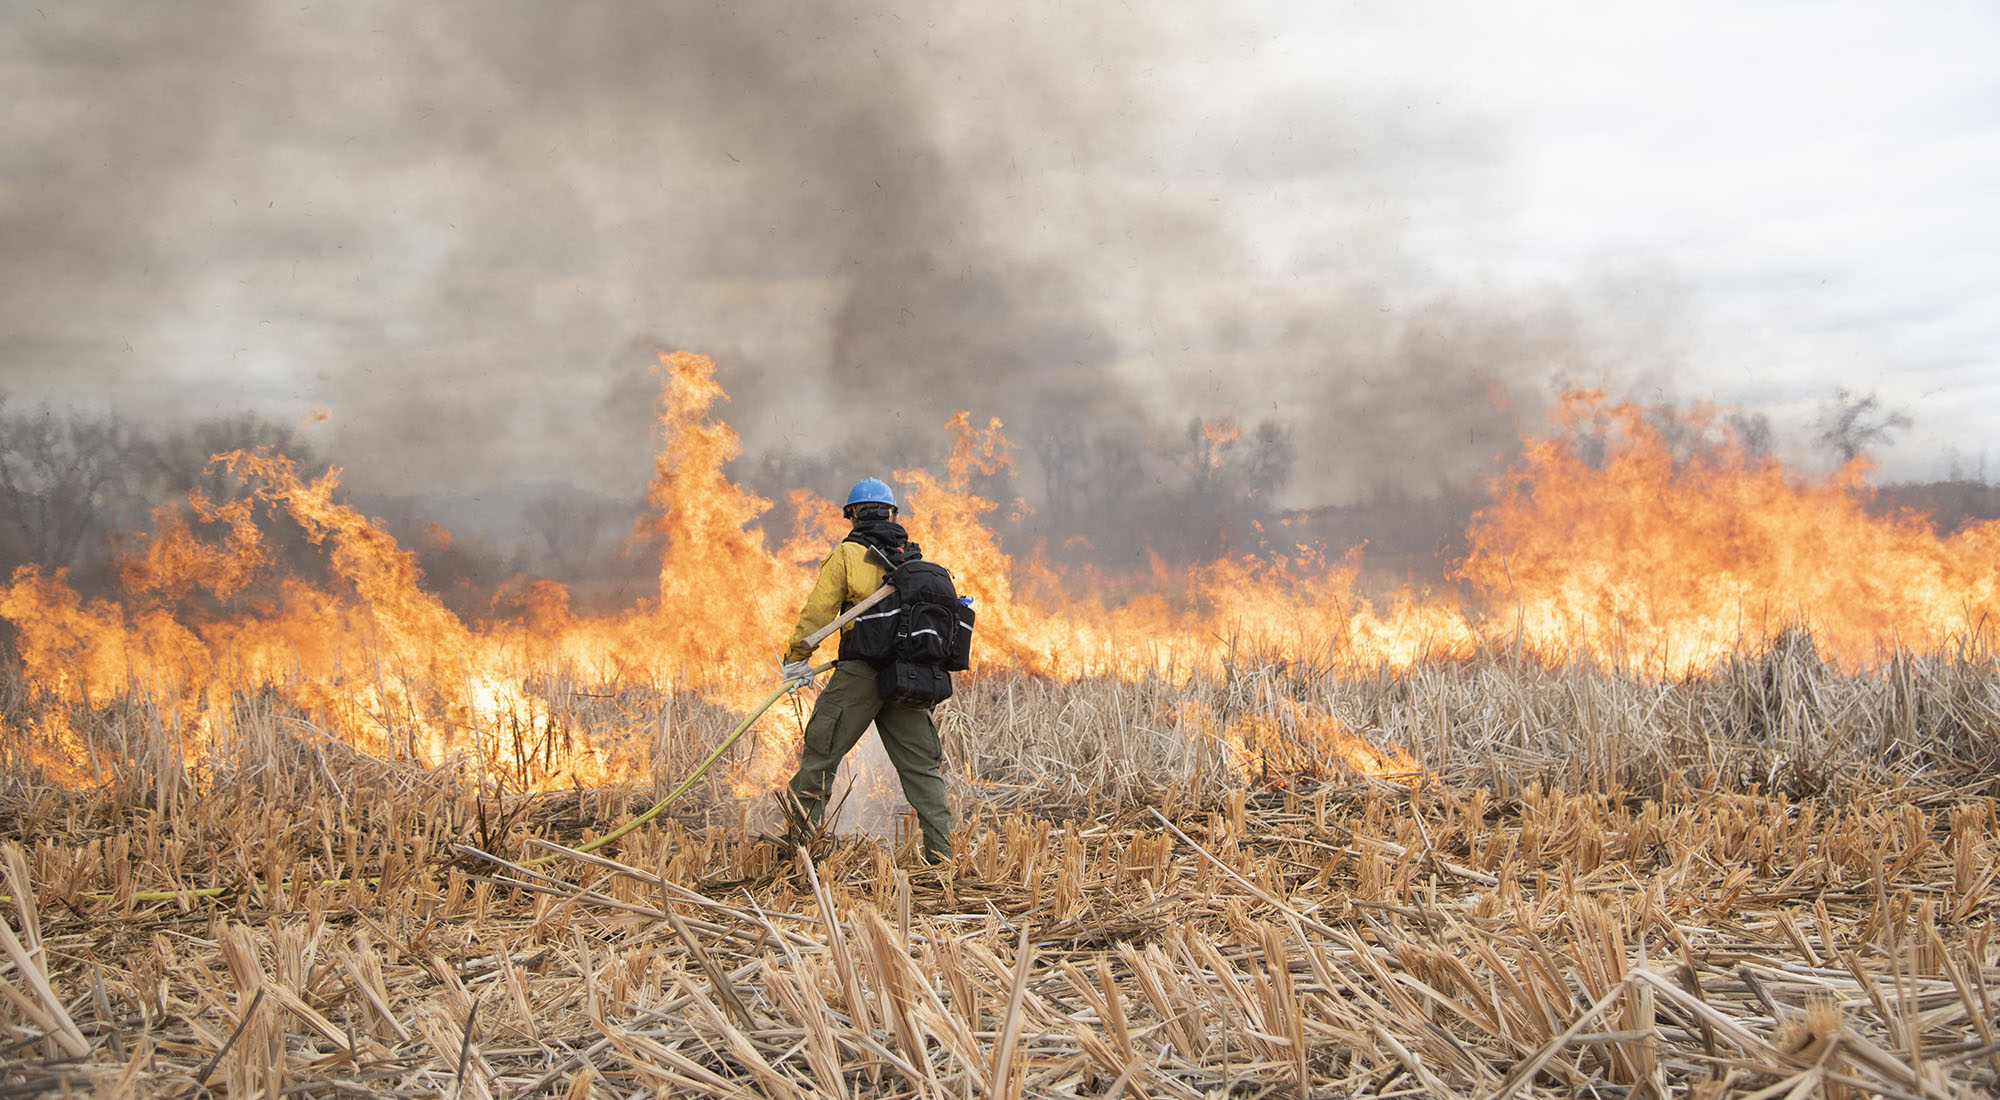 City of Boulder regularly conducts prescribed burns